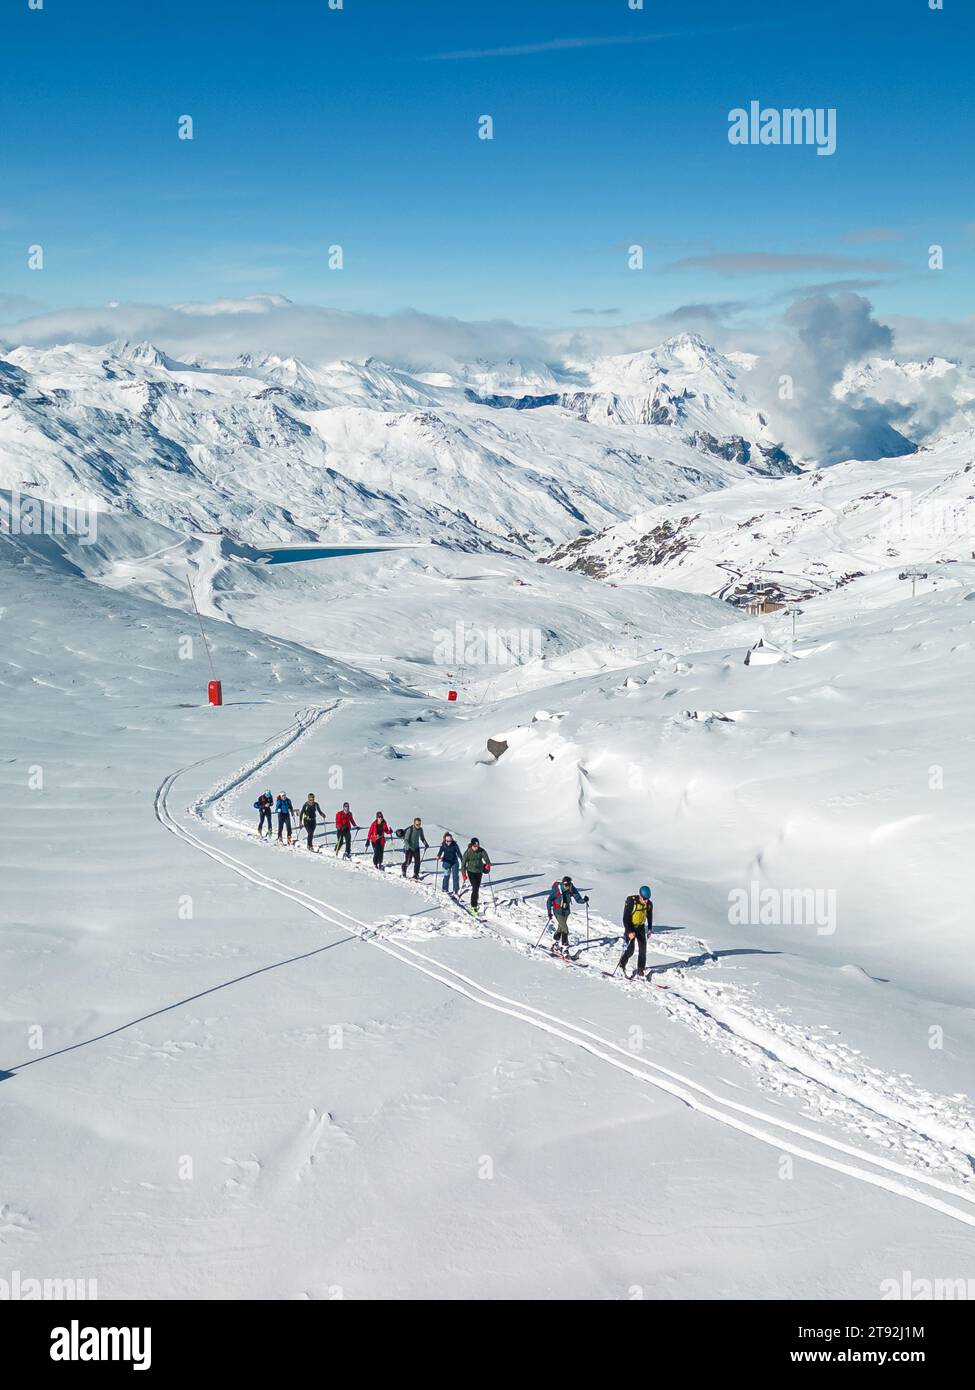 A drone captures tourists skiing in Val Thorens amid snowy landscapes, framed by a brilliant blue sky. Stock Photo